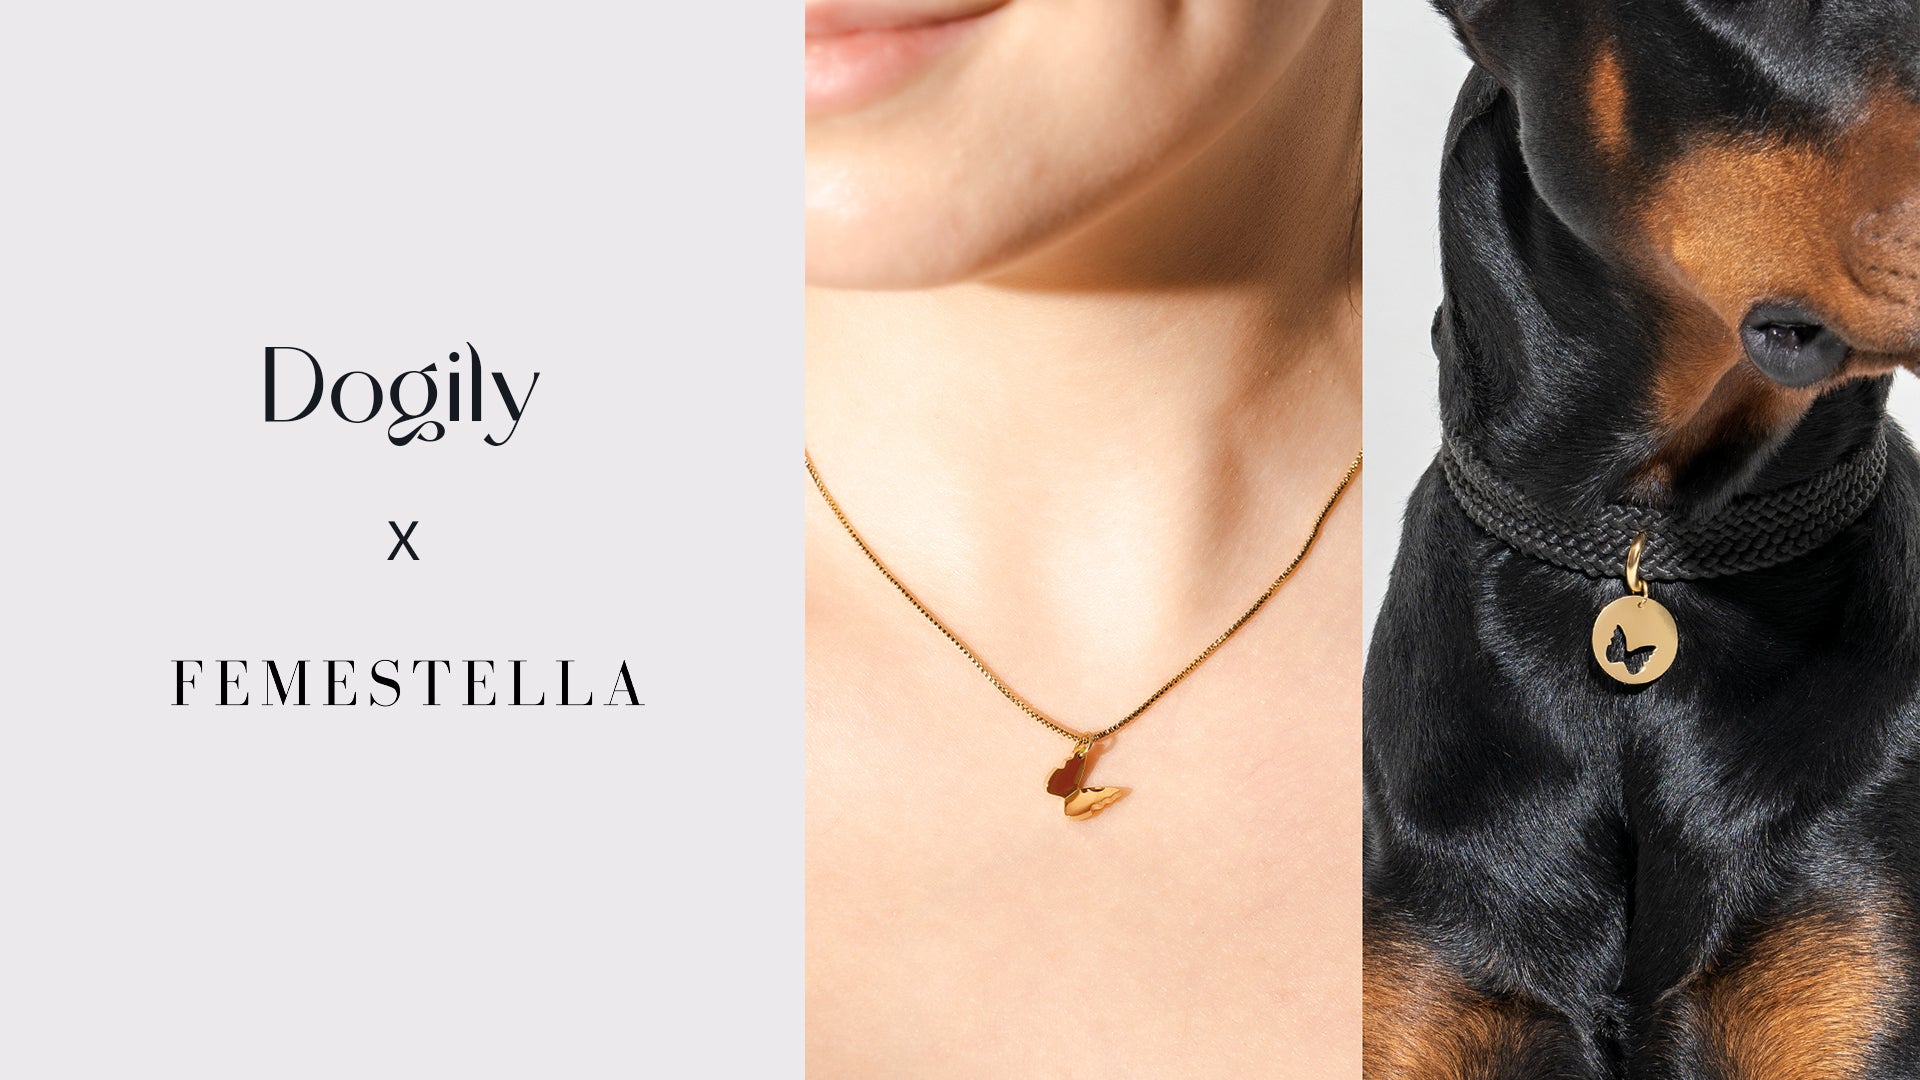 Dog Matching Accessories are the Summer Essential That You and Your Pup Need: 8 Stylish Pieces to Get You Started | Femestella